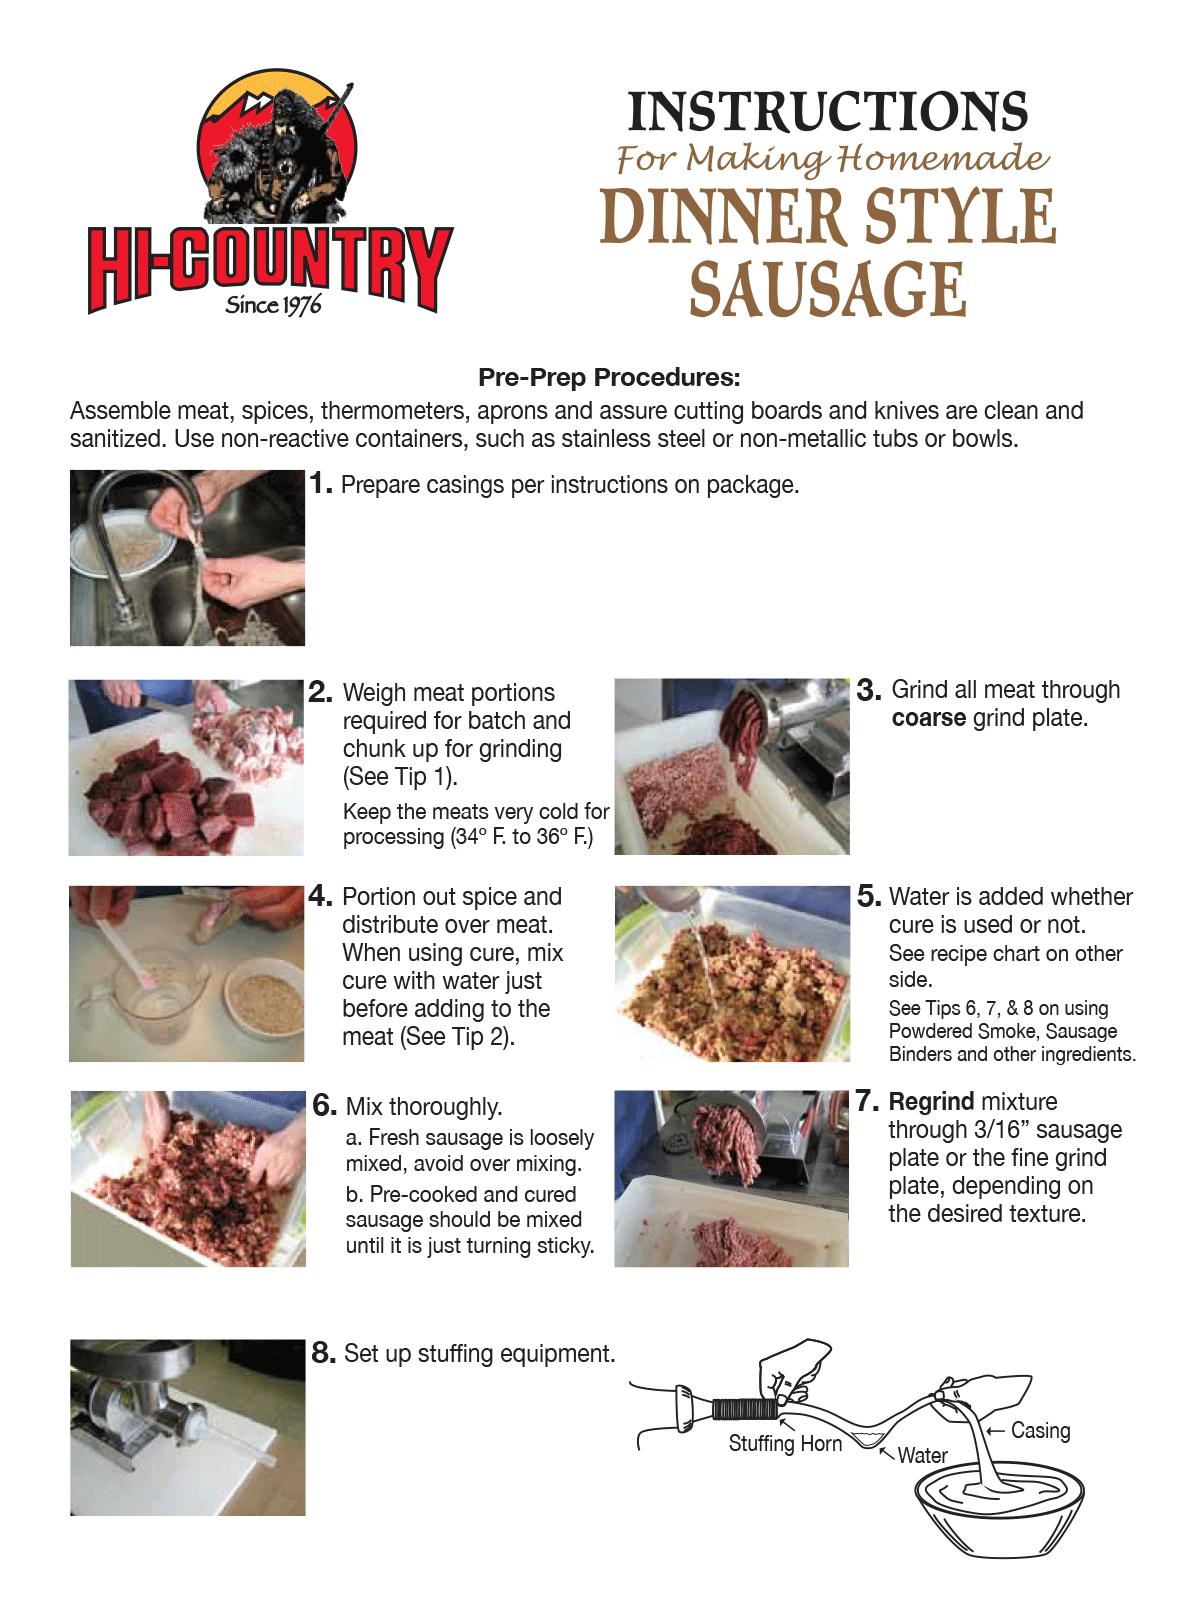 Dinner Style Sausage Instructions